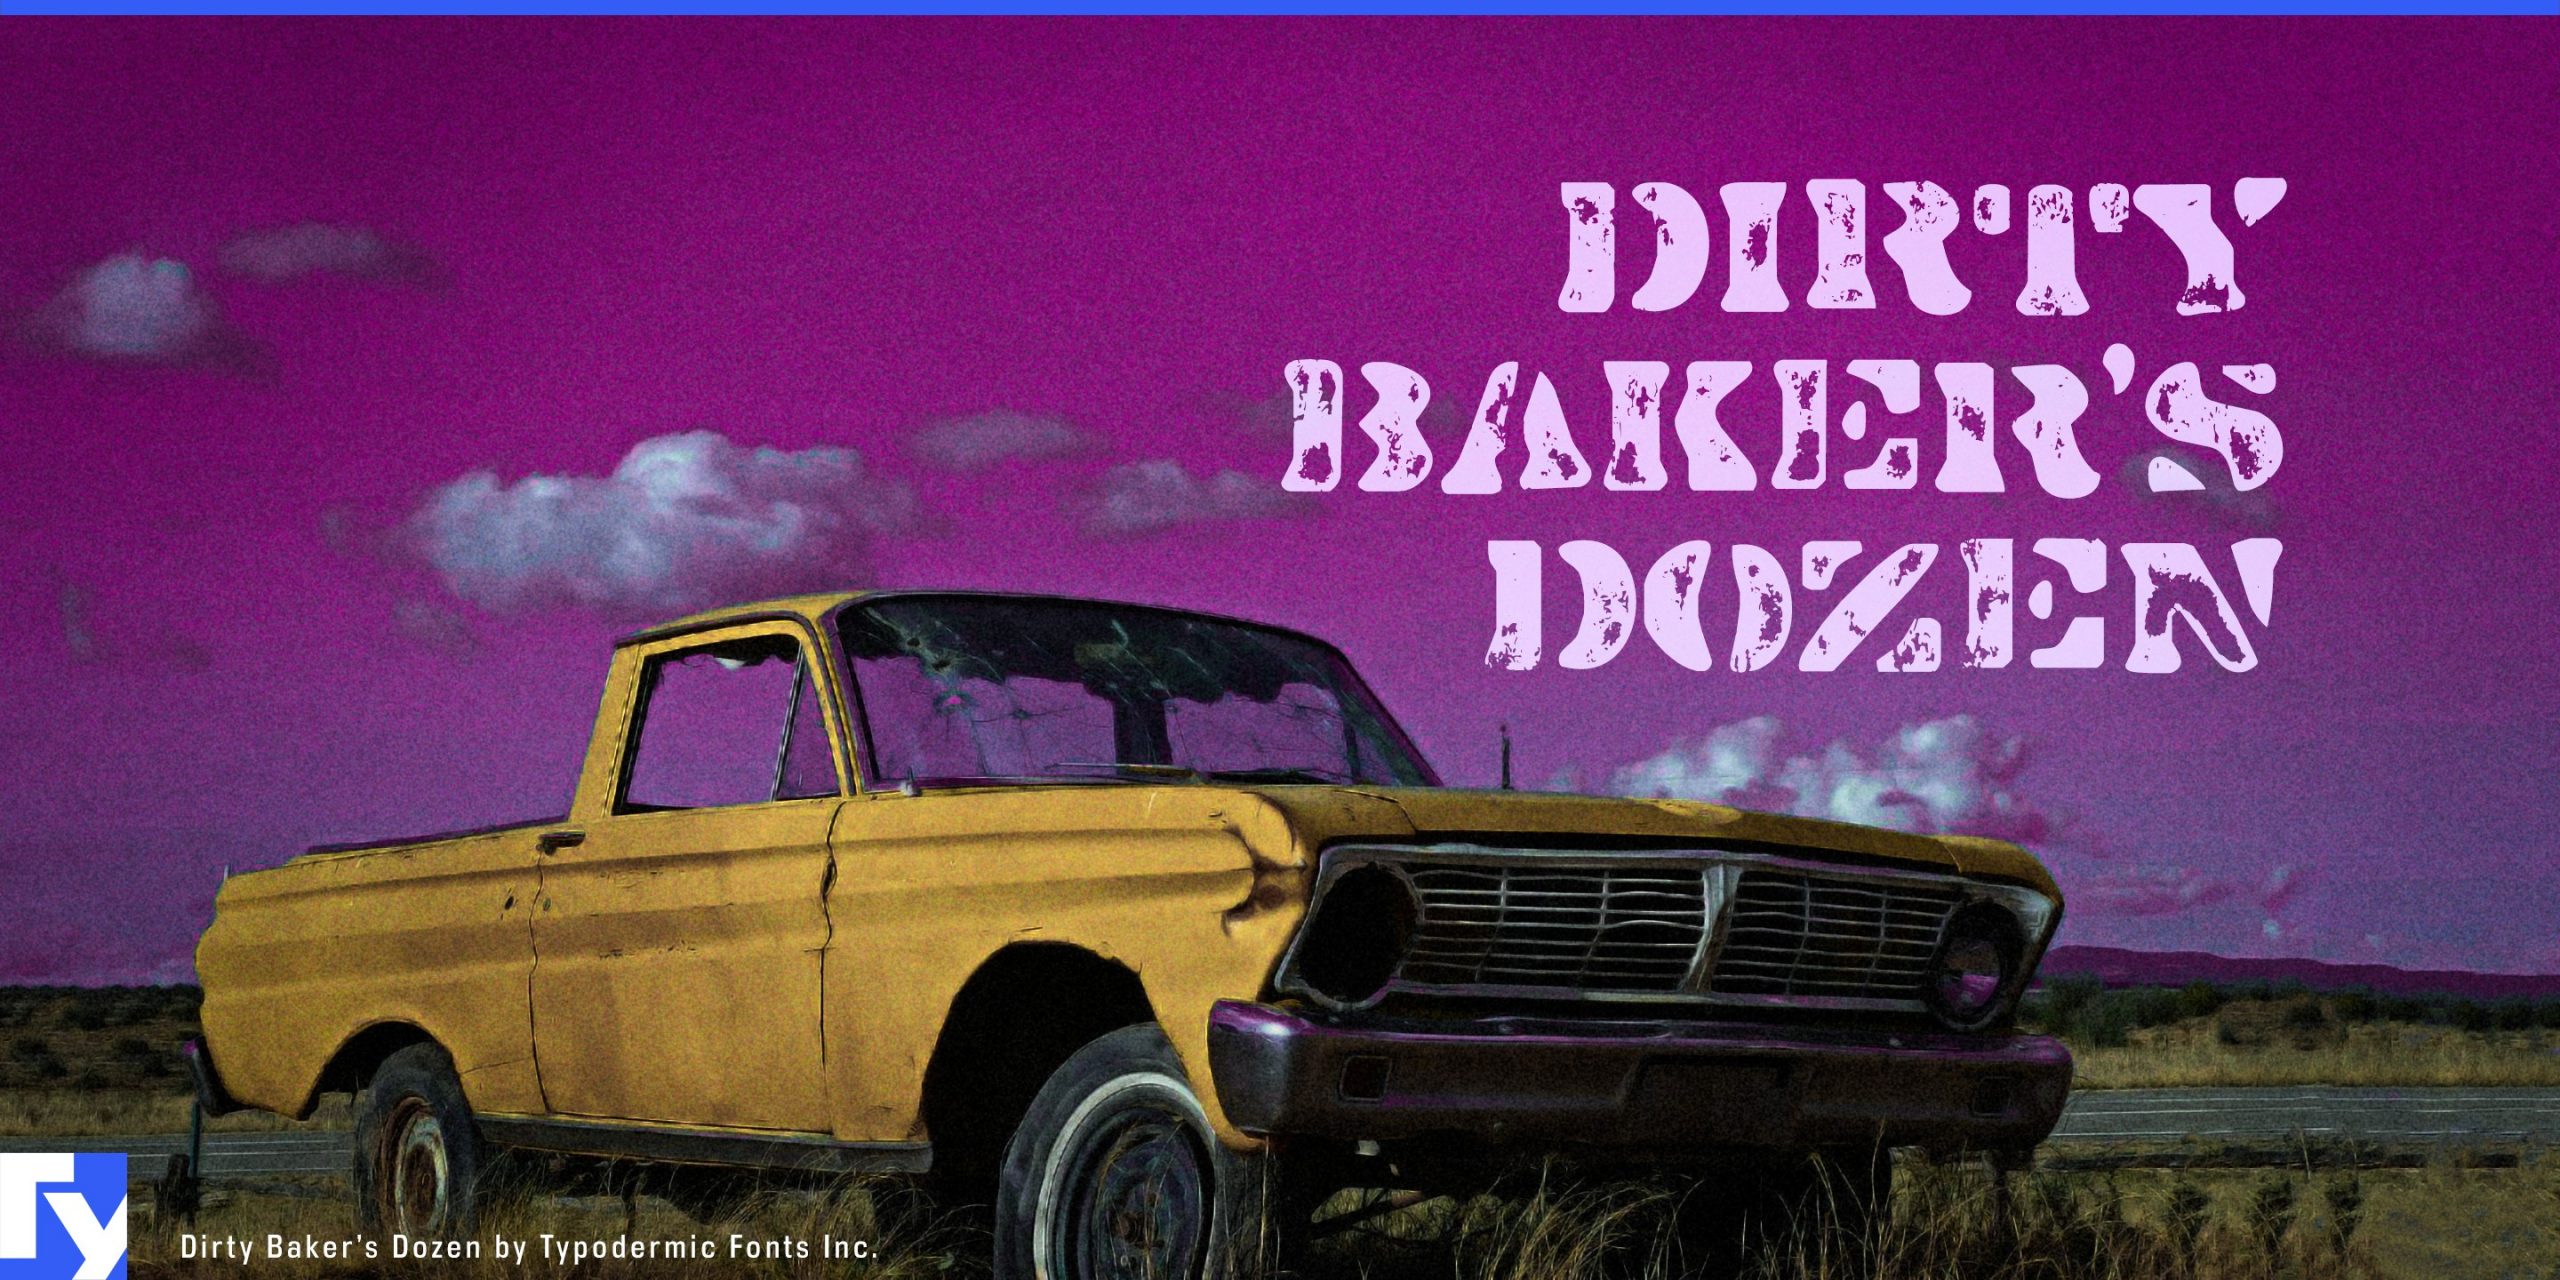 Realistic Grit: Convey Your Message with Dirty Baker's Dozen Typeface